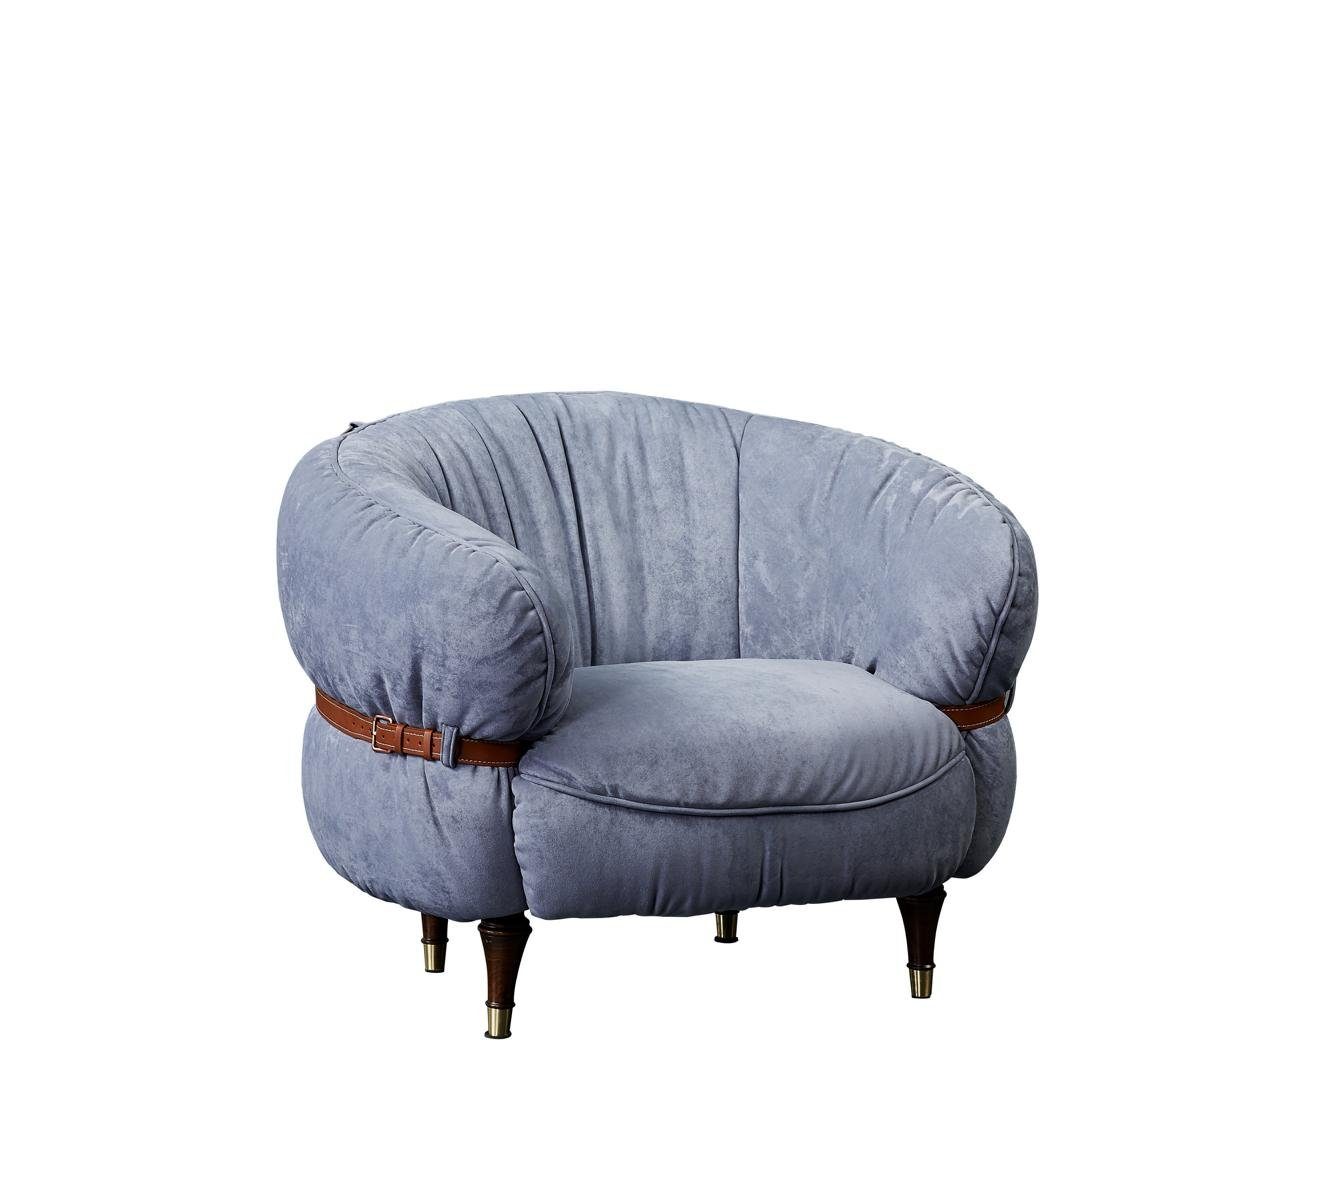 JVmoebel Sessel, Design Sessel Couch Polster Relax Club Stoff Sofa Fernseh Grau Lounge Luxus